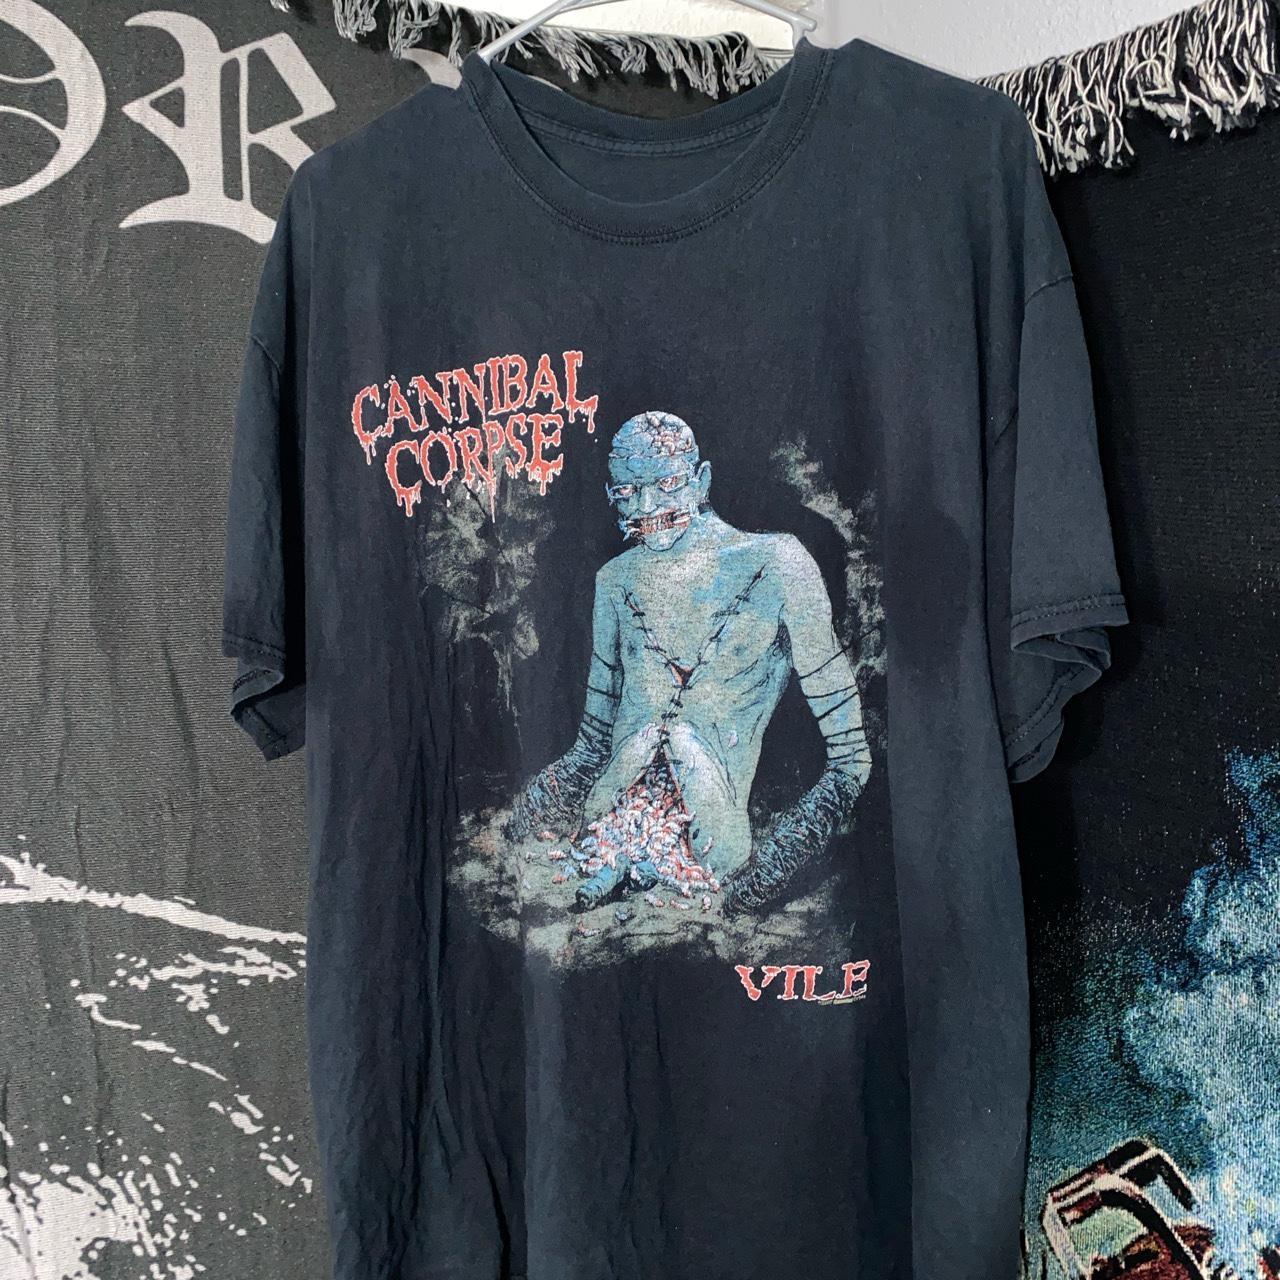 RARE 2007 Cannibal Corpse Vile T-Shirt Large Open to... - Depop